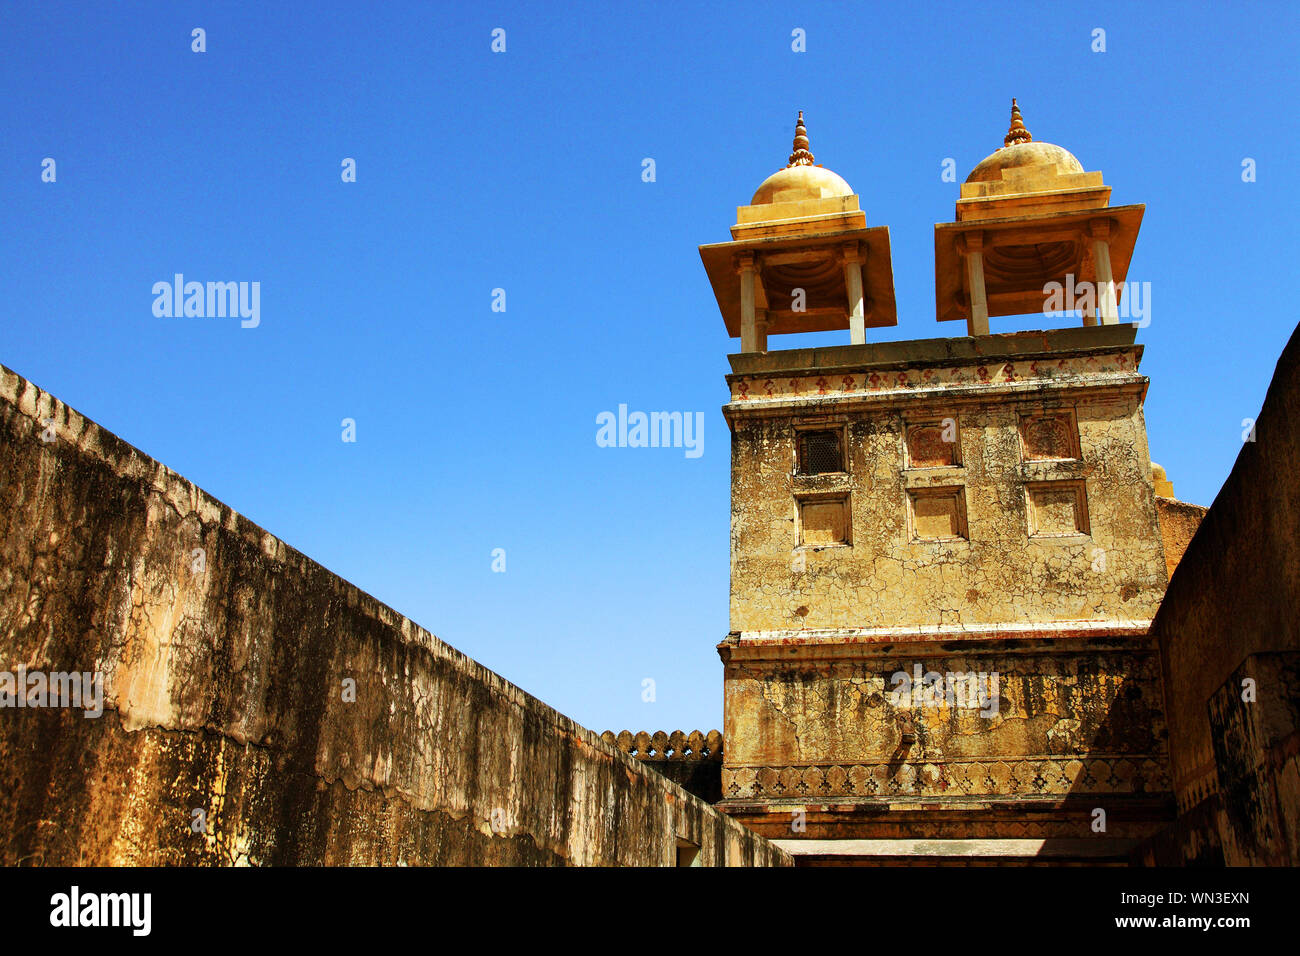 Low Angle View Of Architectural Column At Nahargarh Fort Against Clear Blue Sky Stock Photo